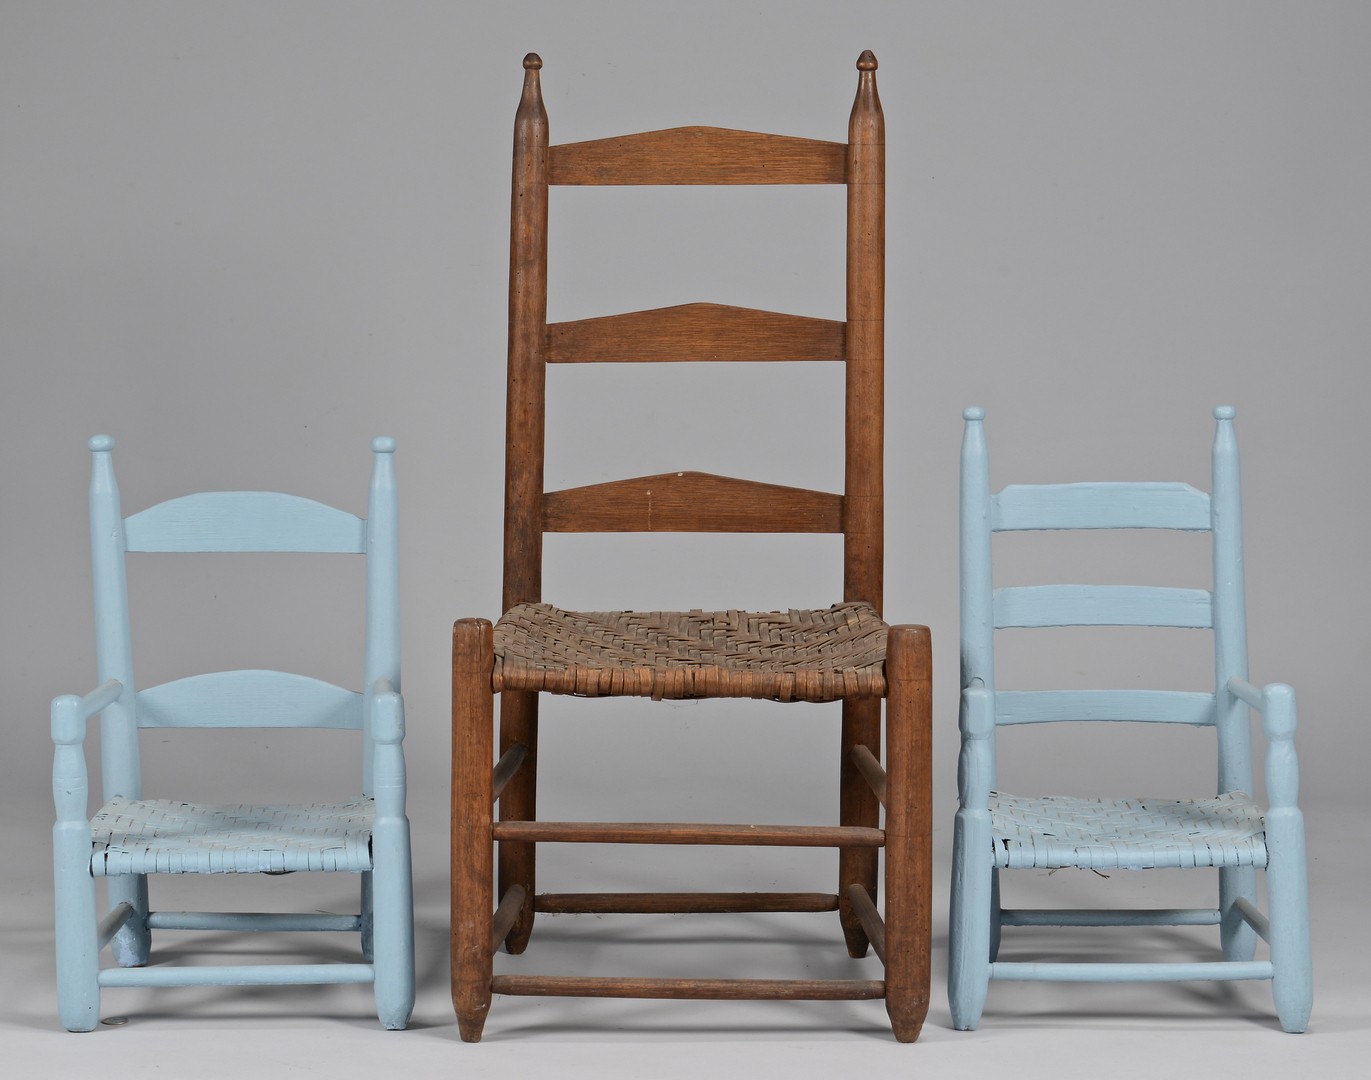 Lot 645: 3 East TN Chairs incl. Pr. Child’s Chairs